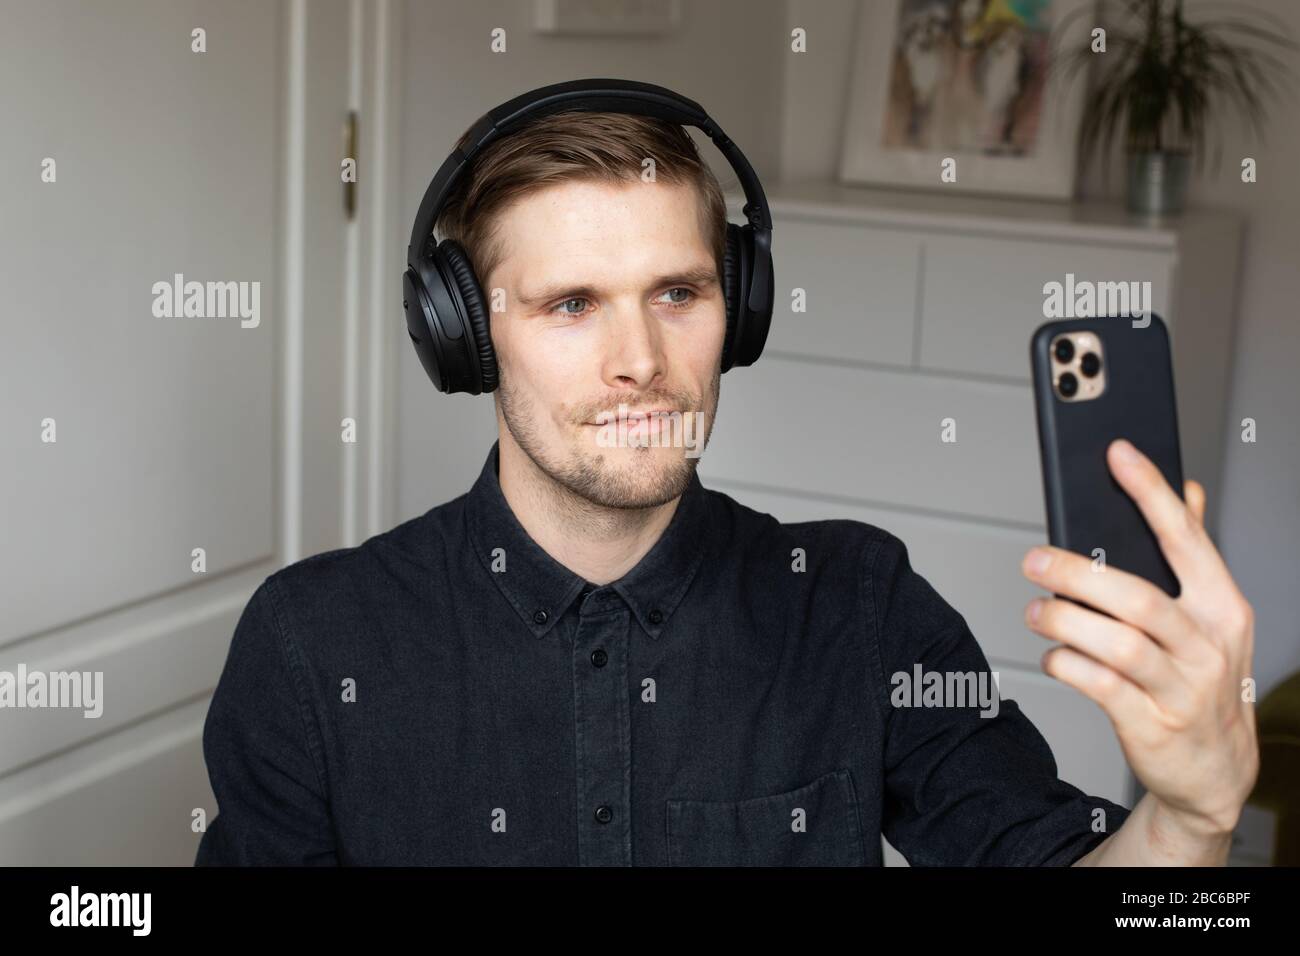 Young man having video conferencing call via smartphone. Home office. Stay at home and work from home concept during Coronavirus pandemic Stock Photo